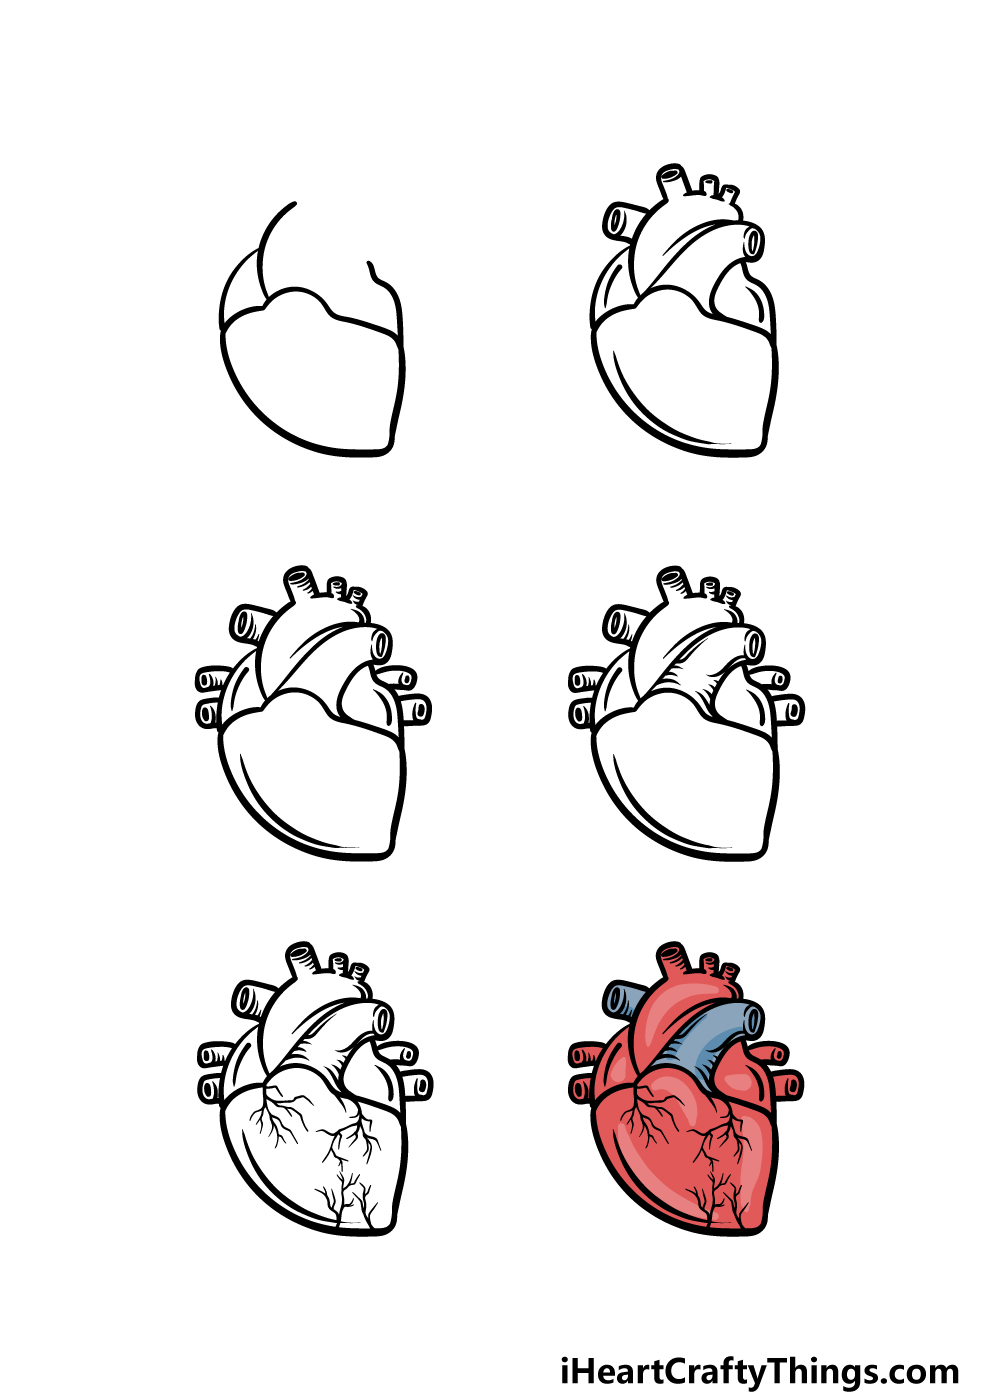 how to draw a cartoon heart in 6 steps